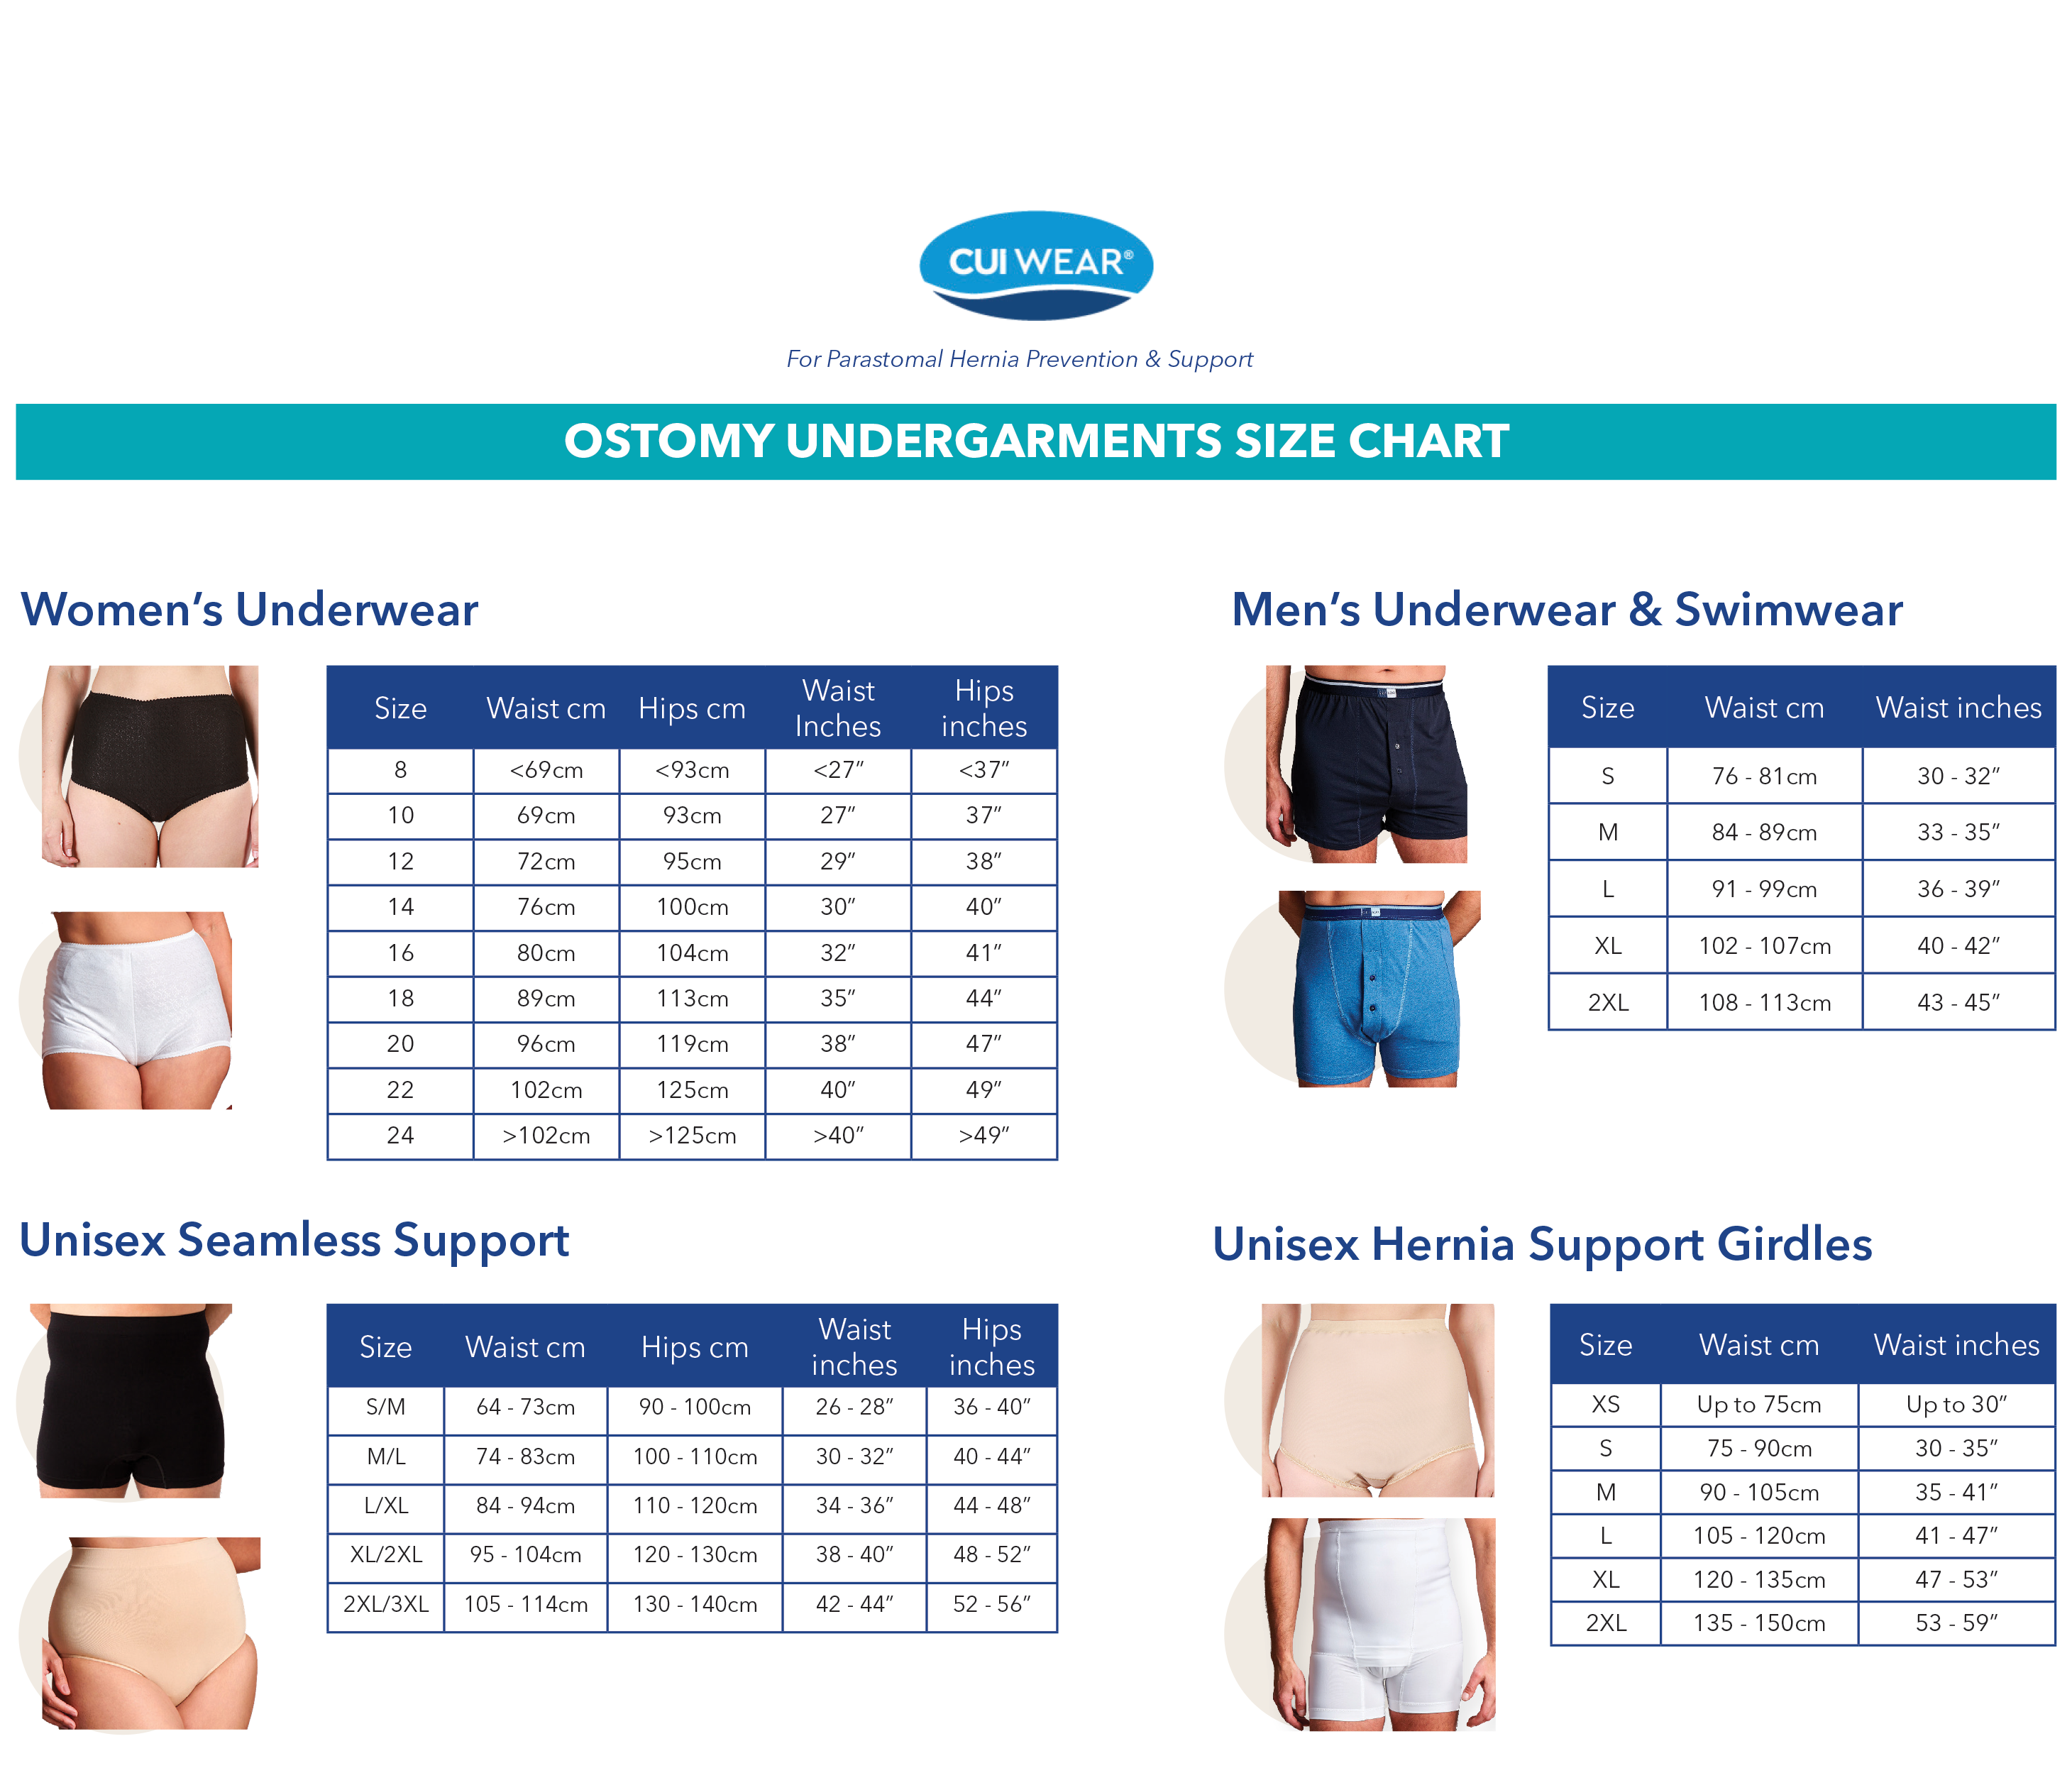 CUI Mens Hernia Low Waist Support Girdle With Legs - 1 each, XSMALL, WHITE - 0